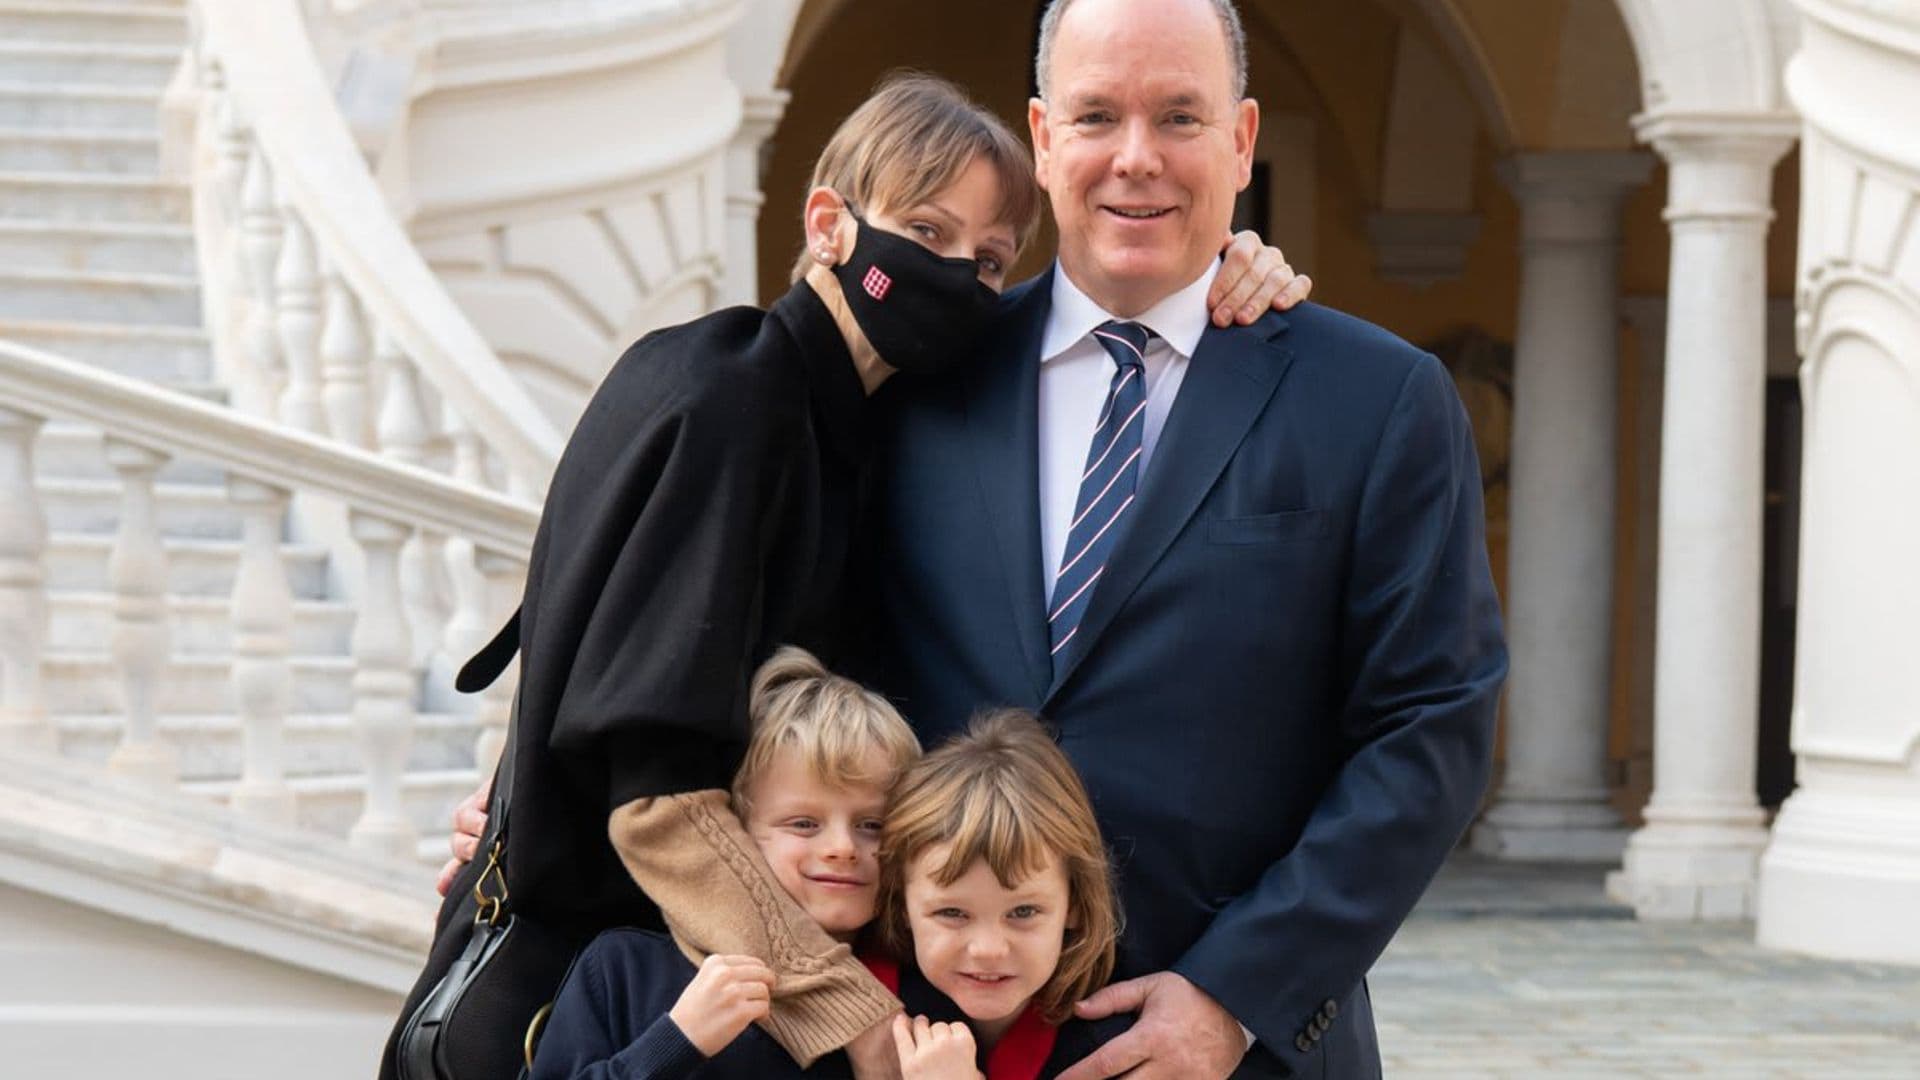 Princess Charlene returns to Monaco: See photos from the royal family’s reunion